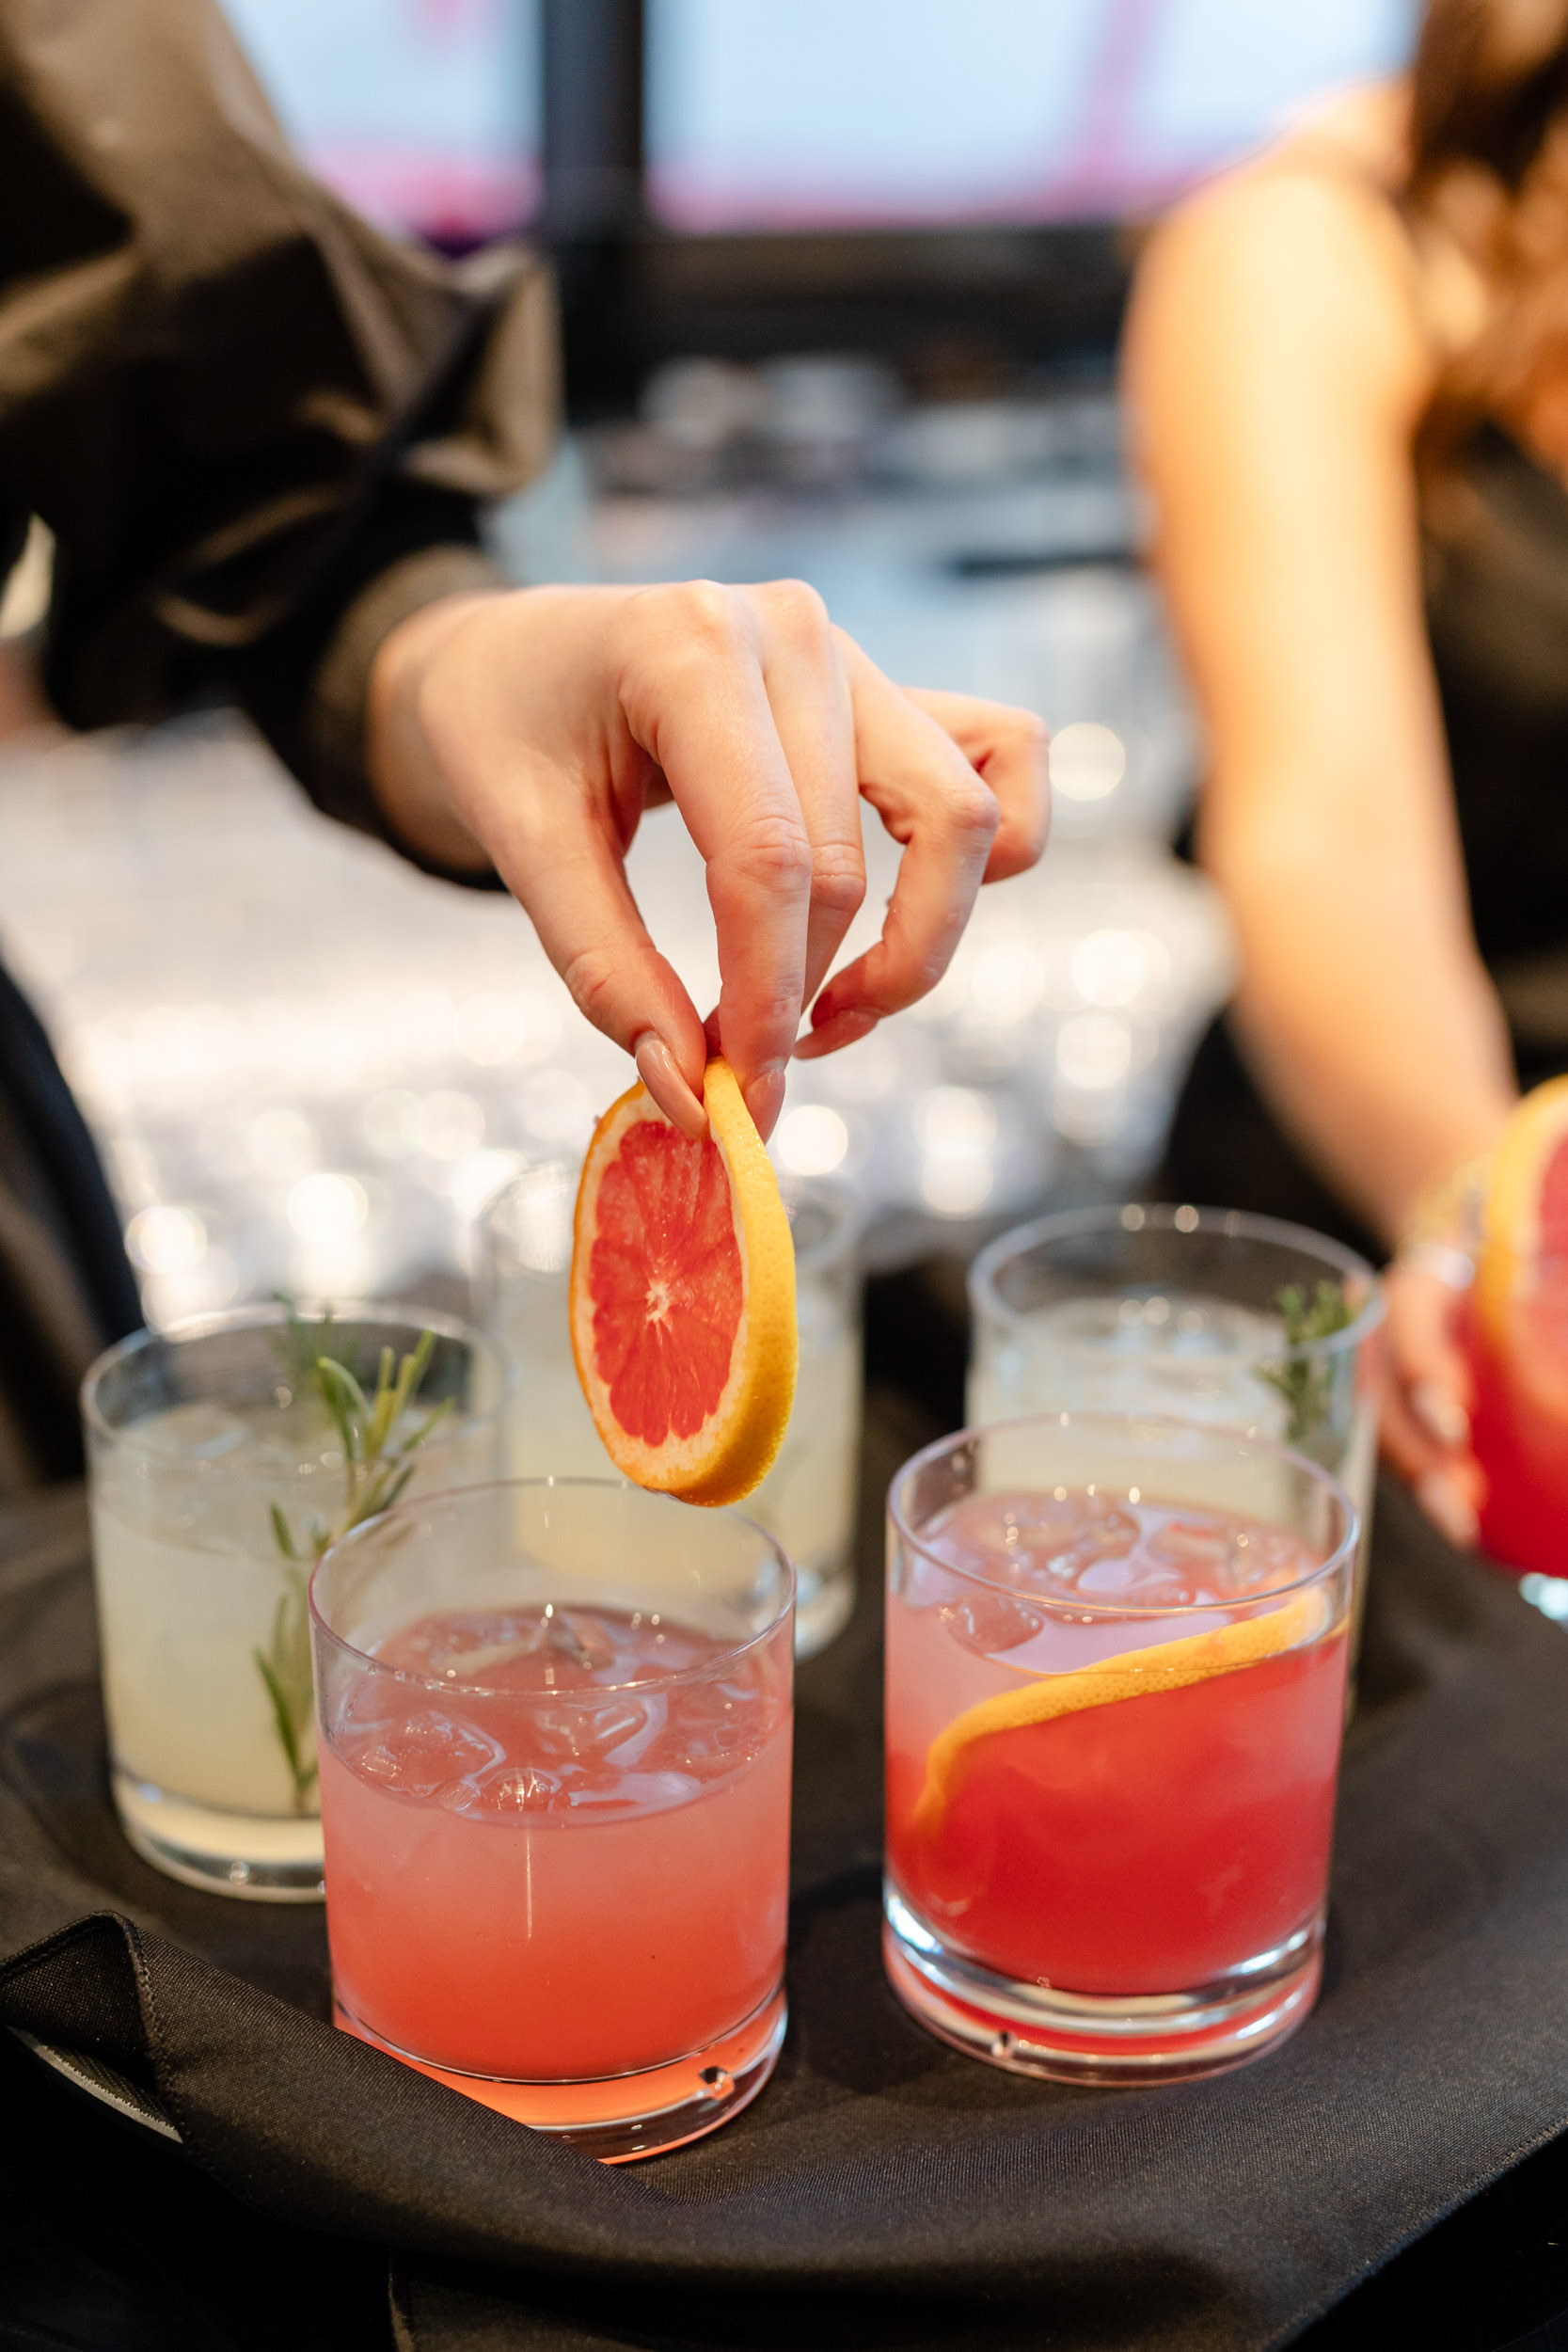 A woman is putting a slice of grapefruit into a glass